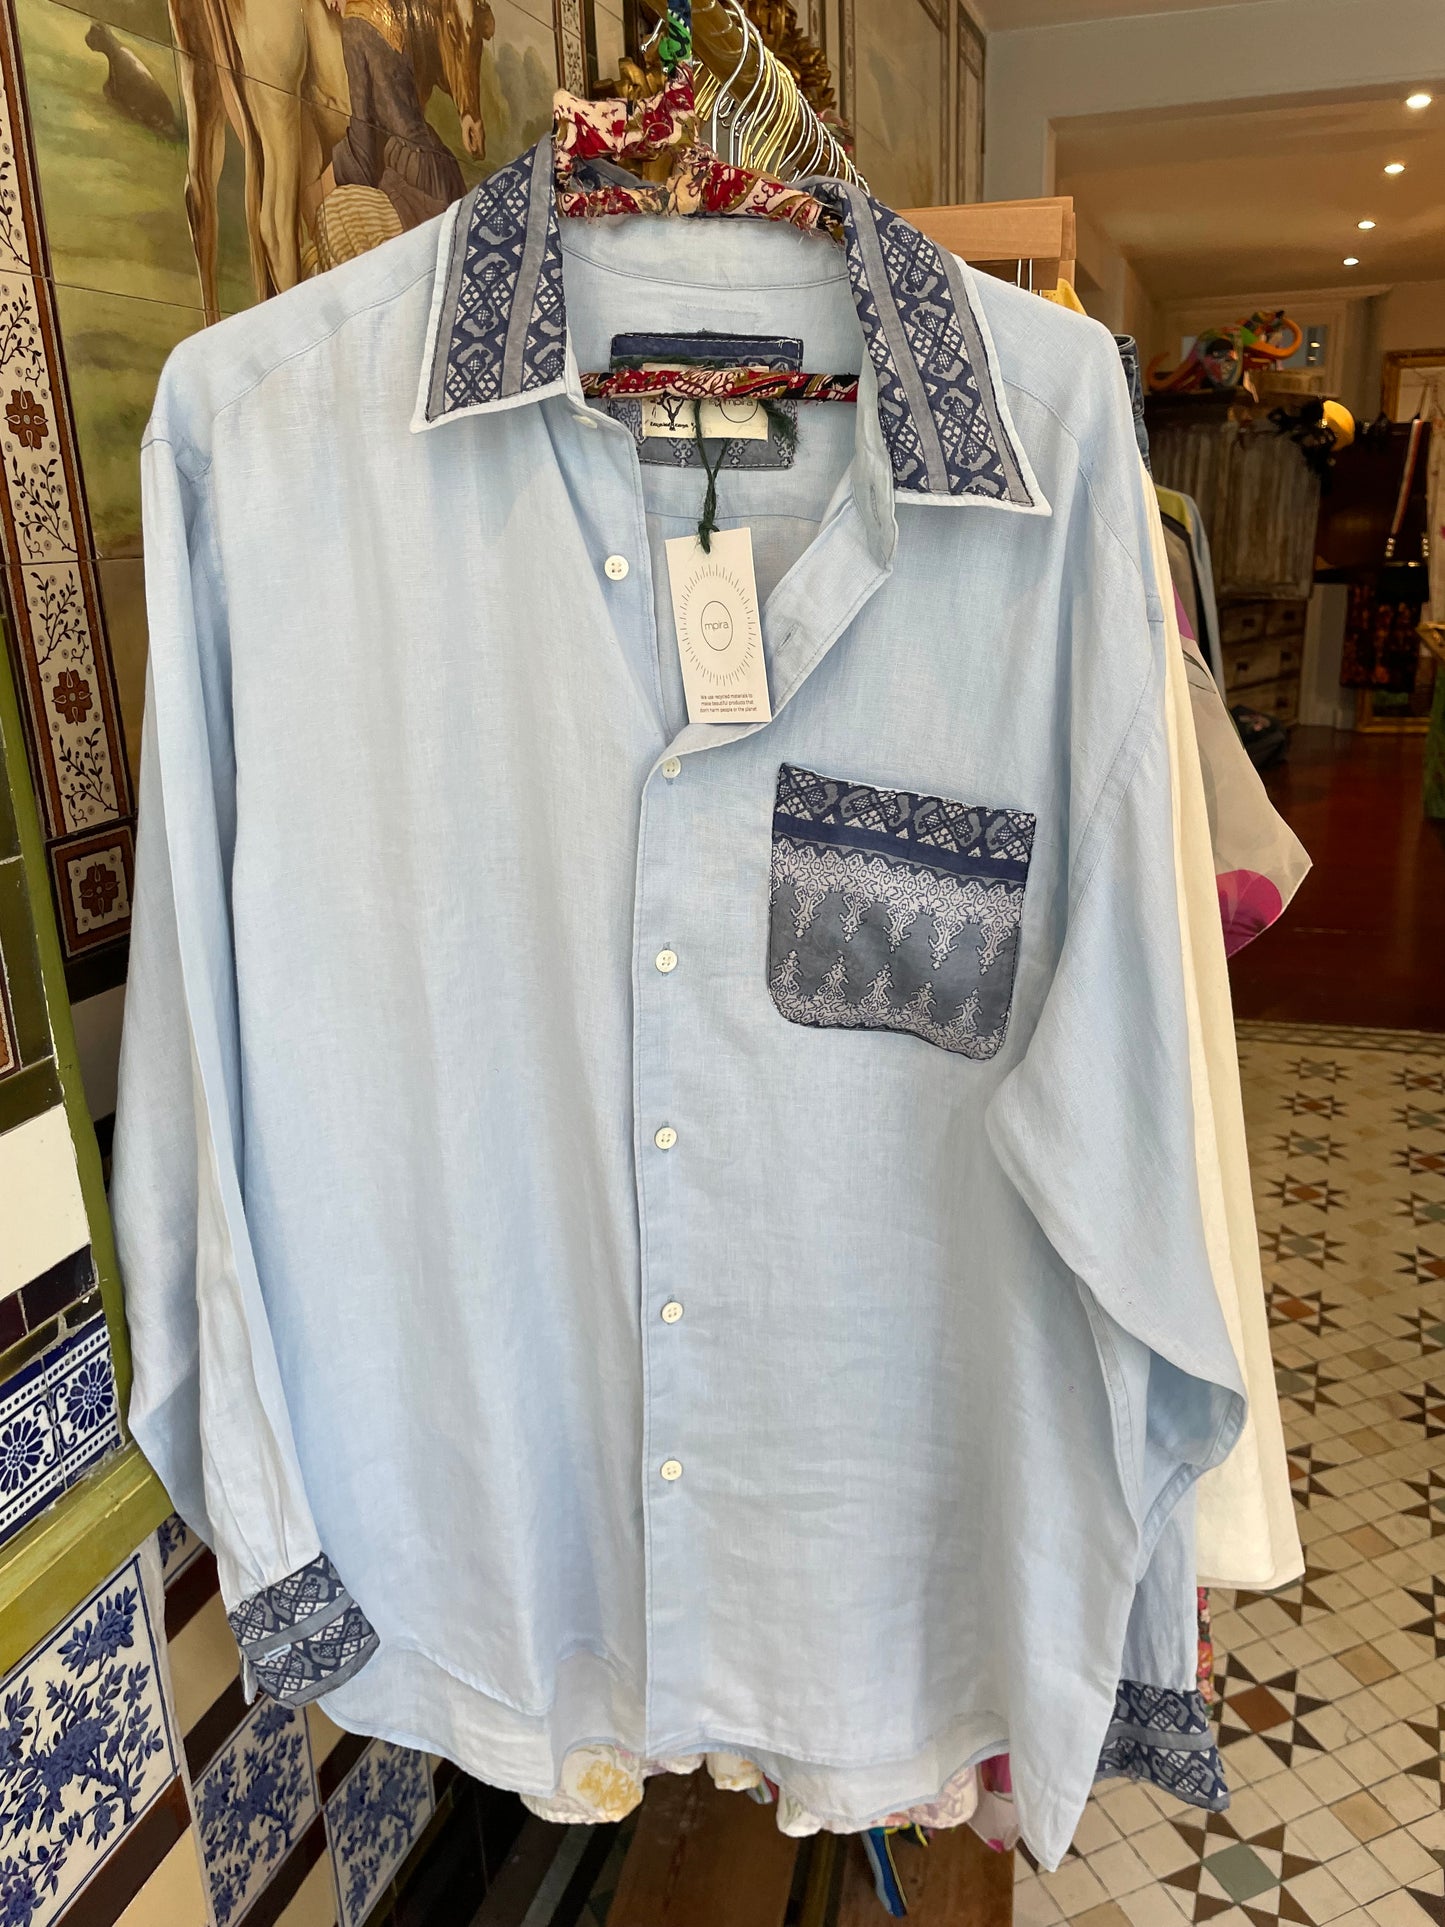 An Upcycled Shirt from mpira.